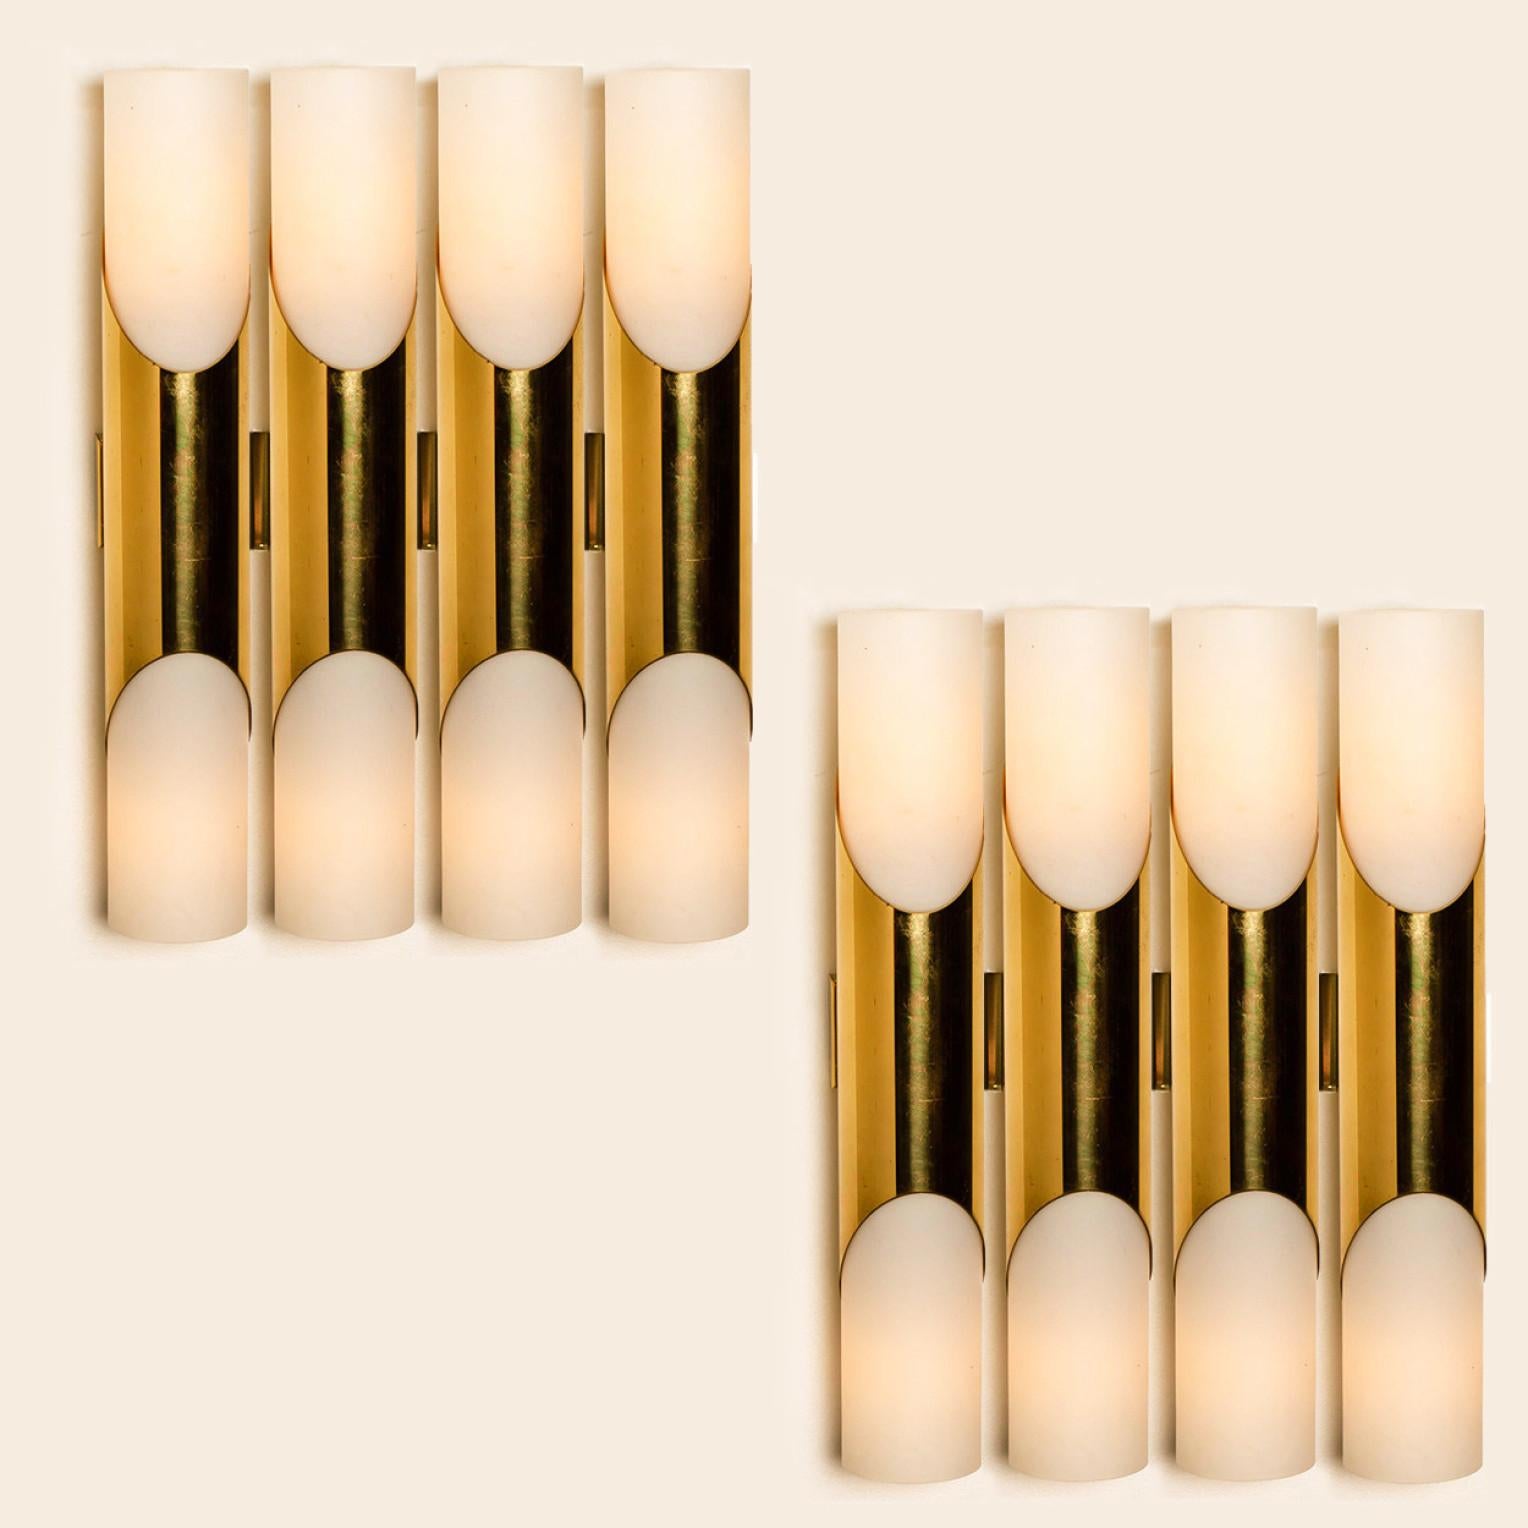 Mid-Century Modern Pair of Wall Sconces or Wall Lights in the Style of RAAK, 1970 For Sale